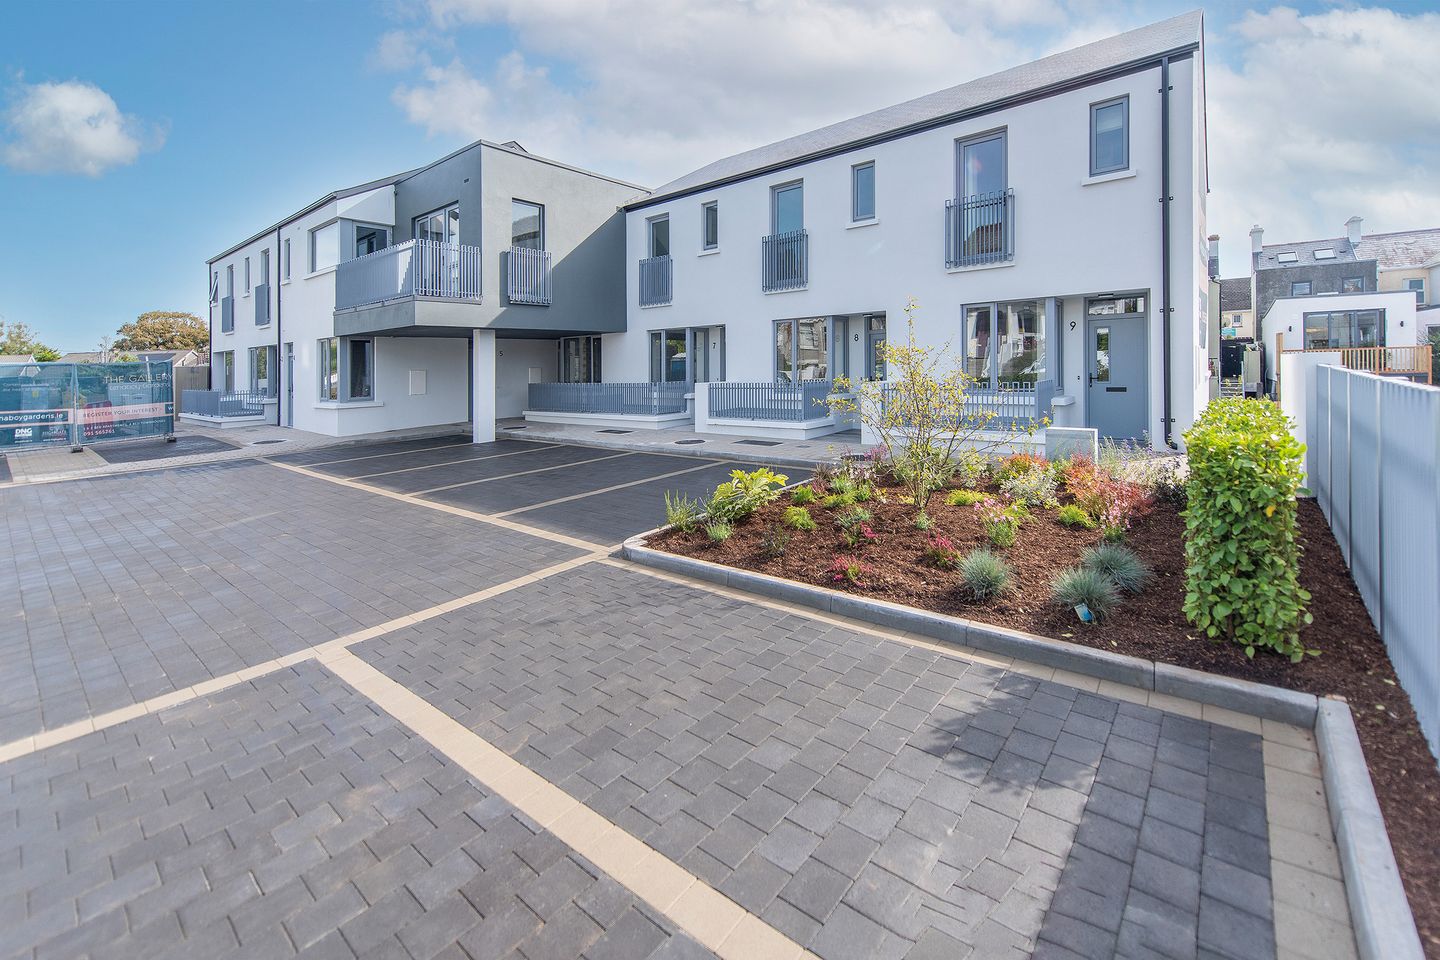 1 Bedroom Apartment, The Gallery, The Gallery, Lenaboy Gardens, Salthill, Co. Galway